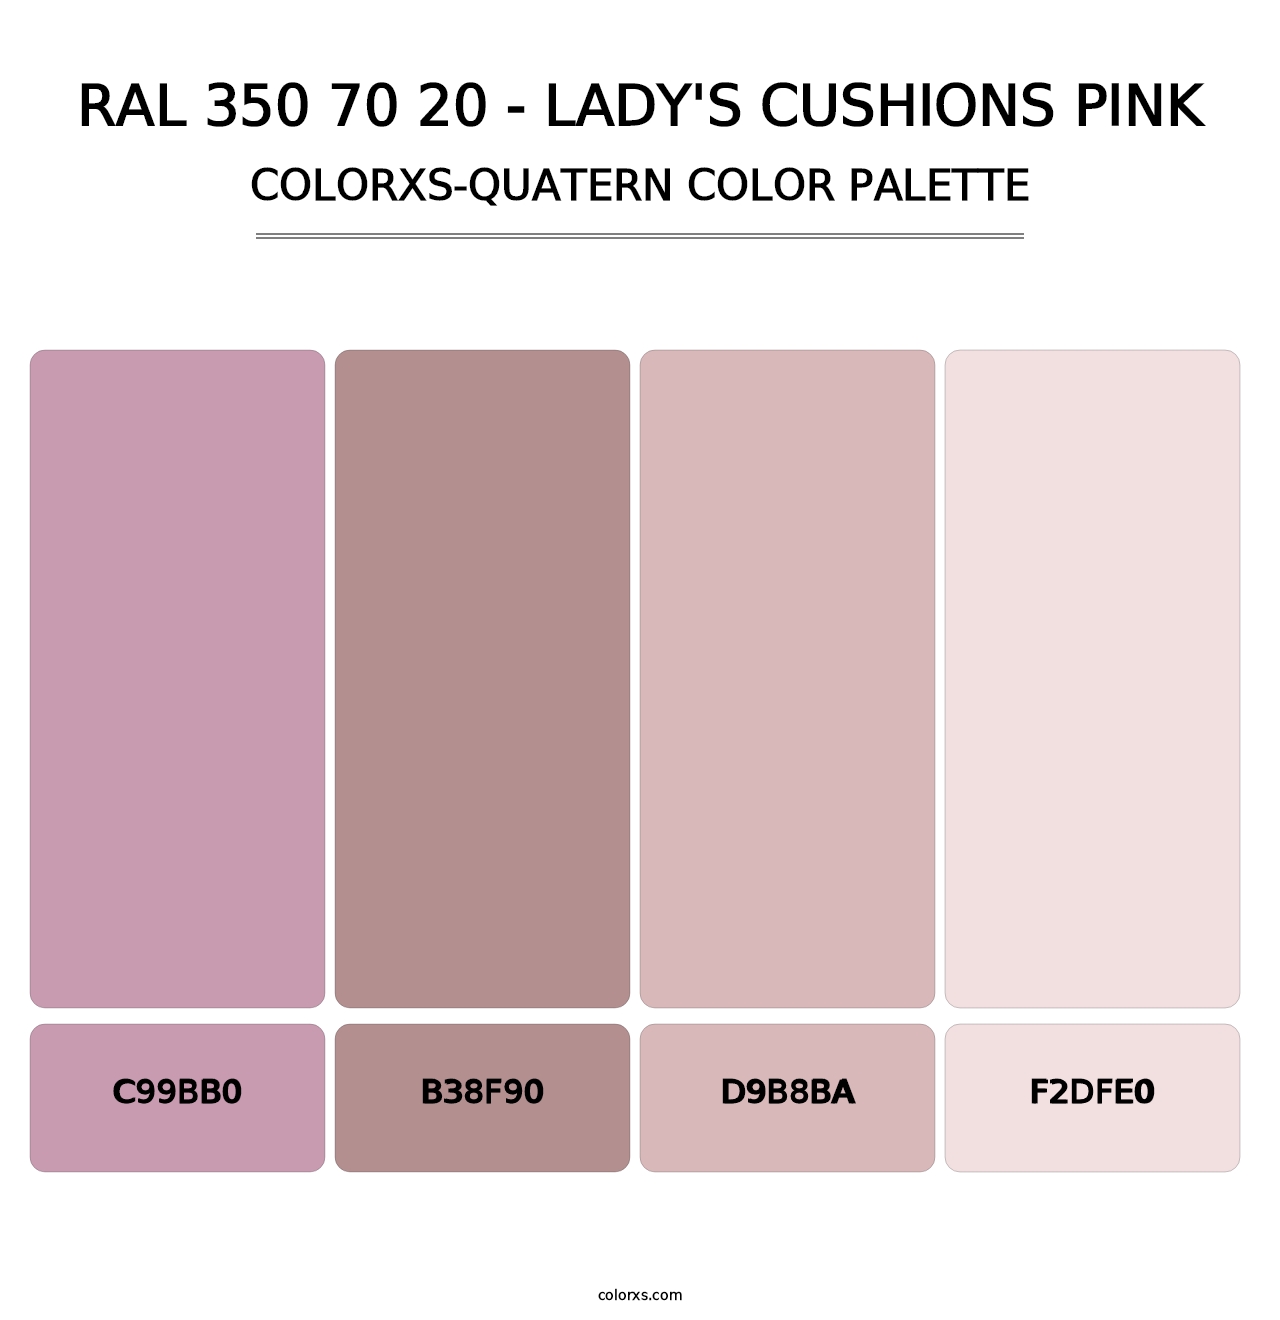 RAL 350 70 20 - Lady's Cushions Pink - Colorxs Quatern Palette